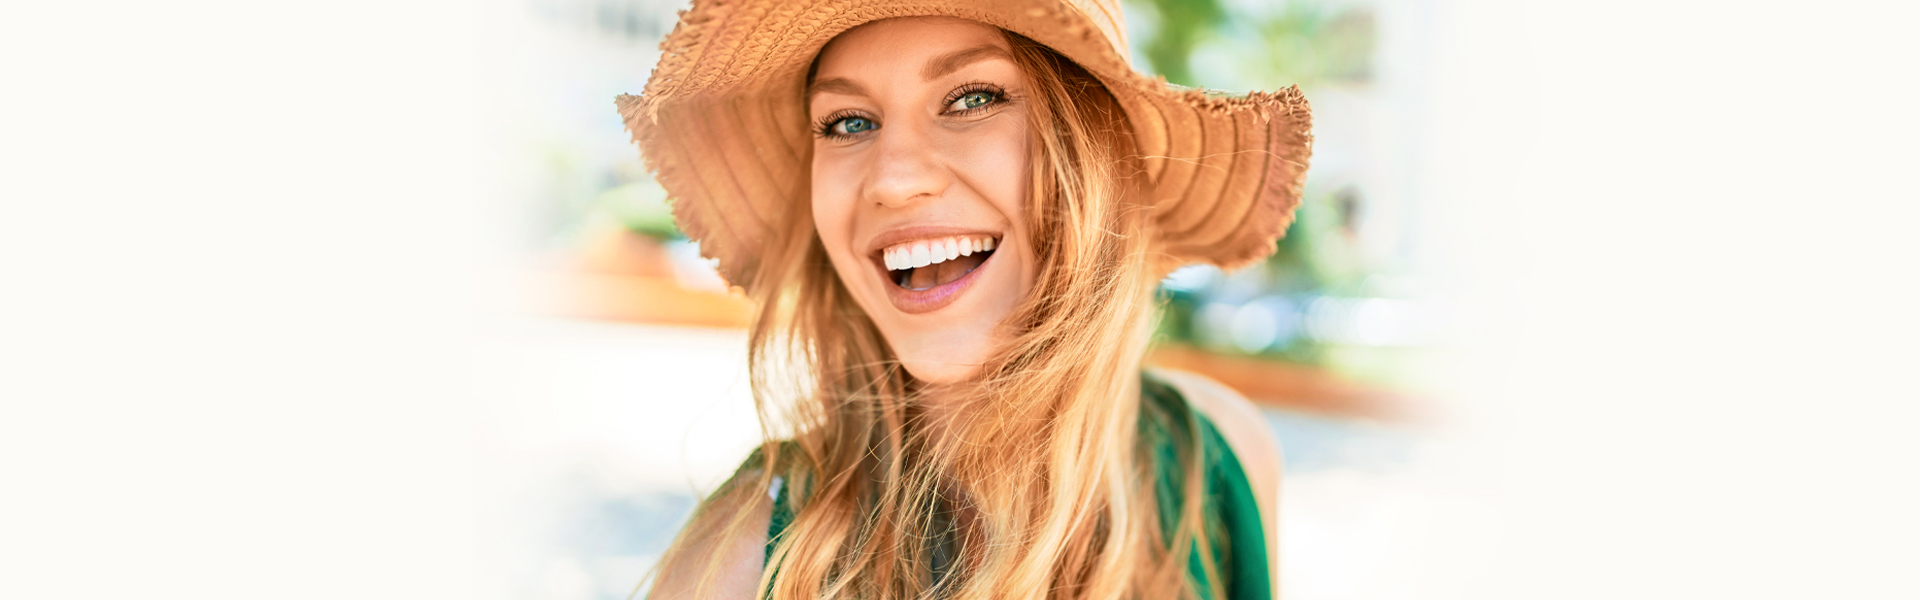 6 Reasons Why You Should Consider Teeth Whitening in Tampa